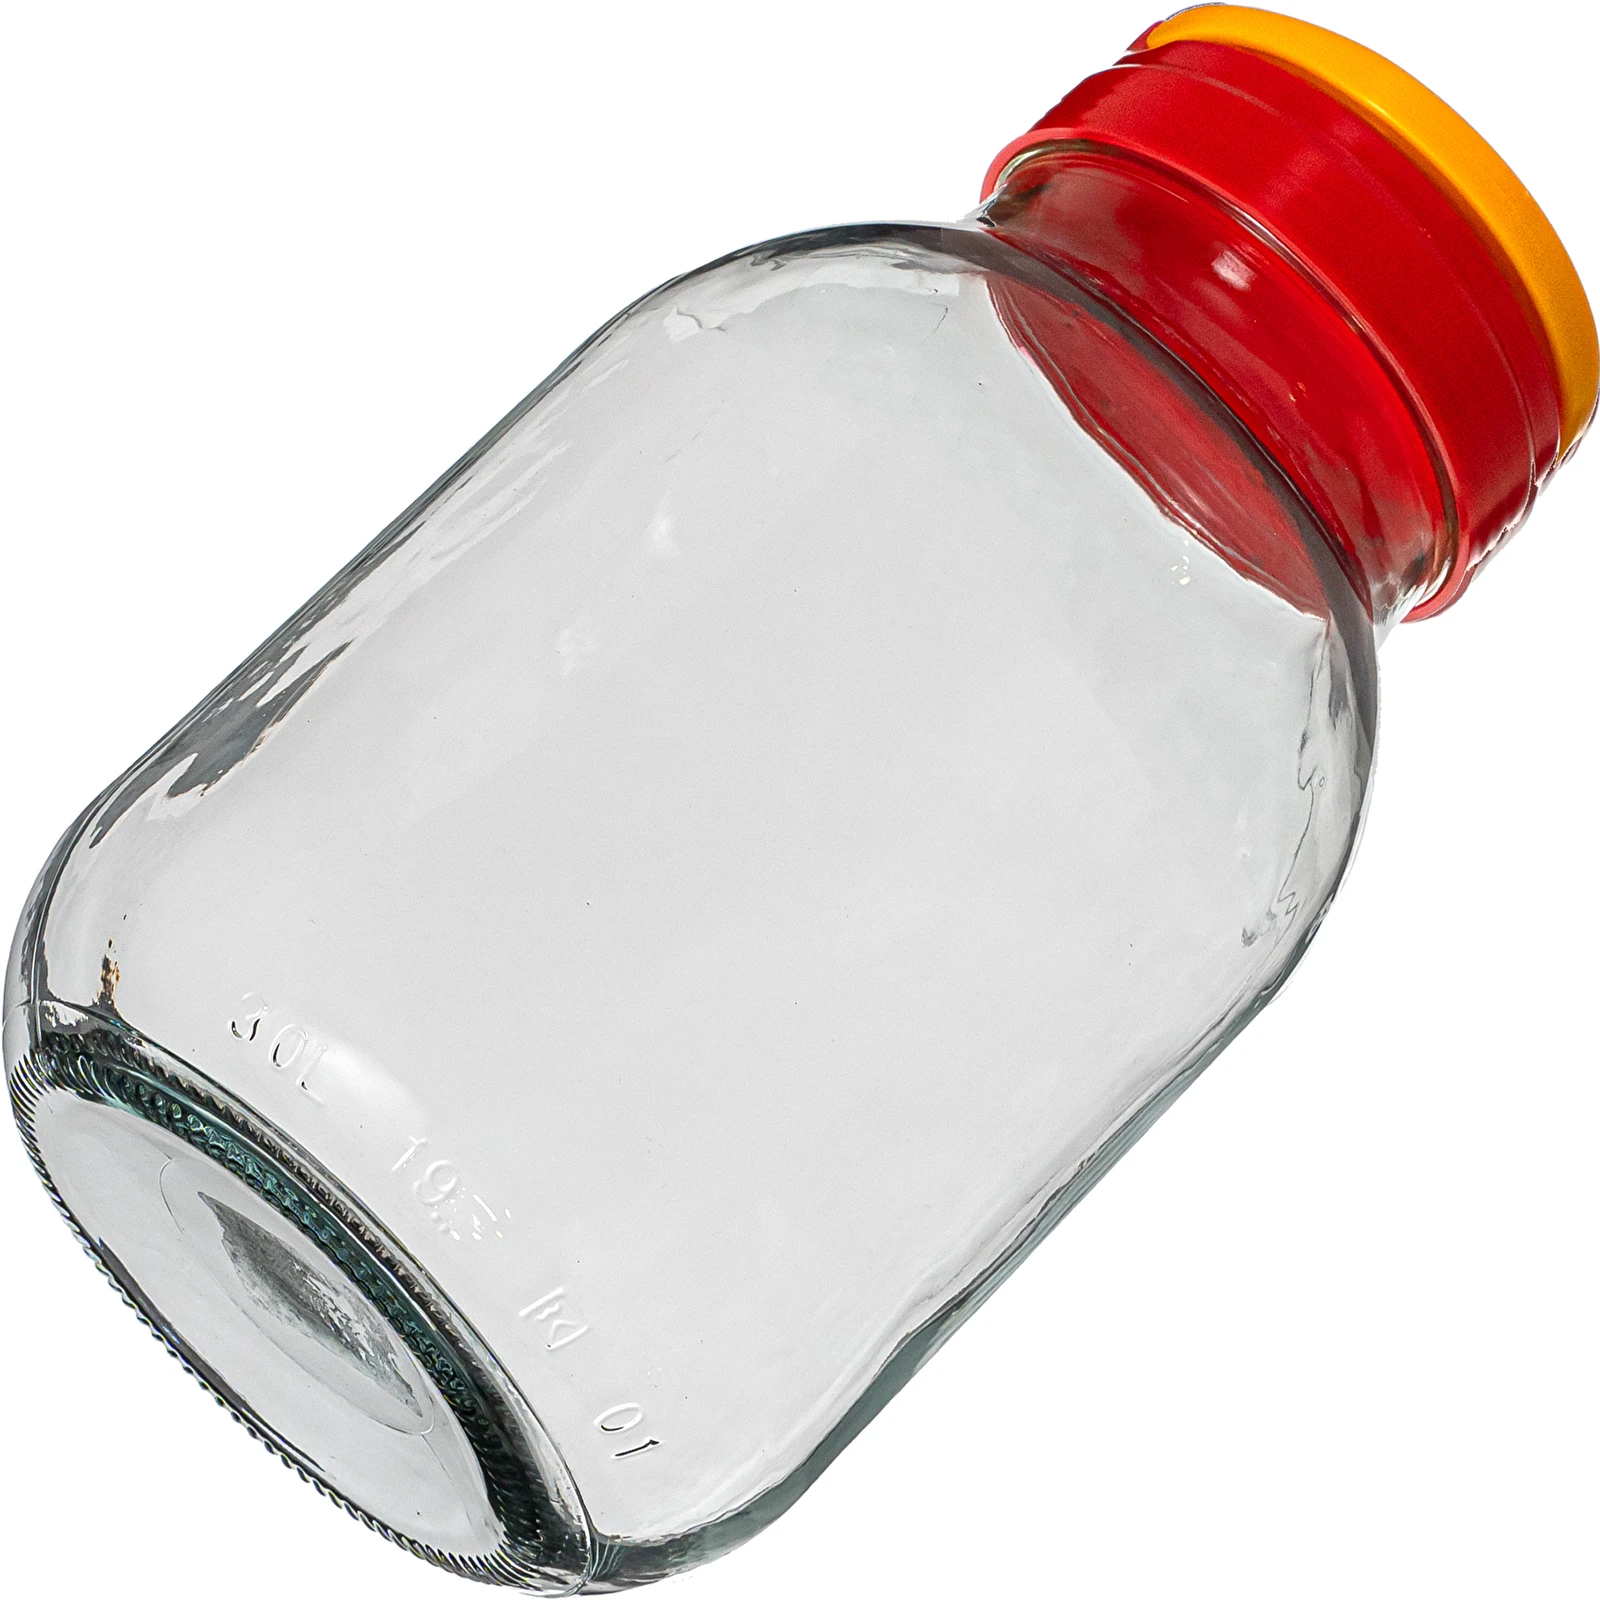 https://browin.com/static/images/1600/3l-twist-off-glass-jar-with-plastic-lid-o100-and-tongs-133304_d.webp